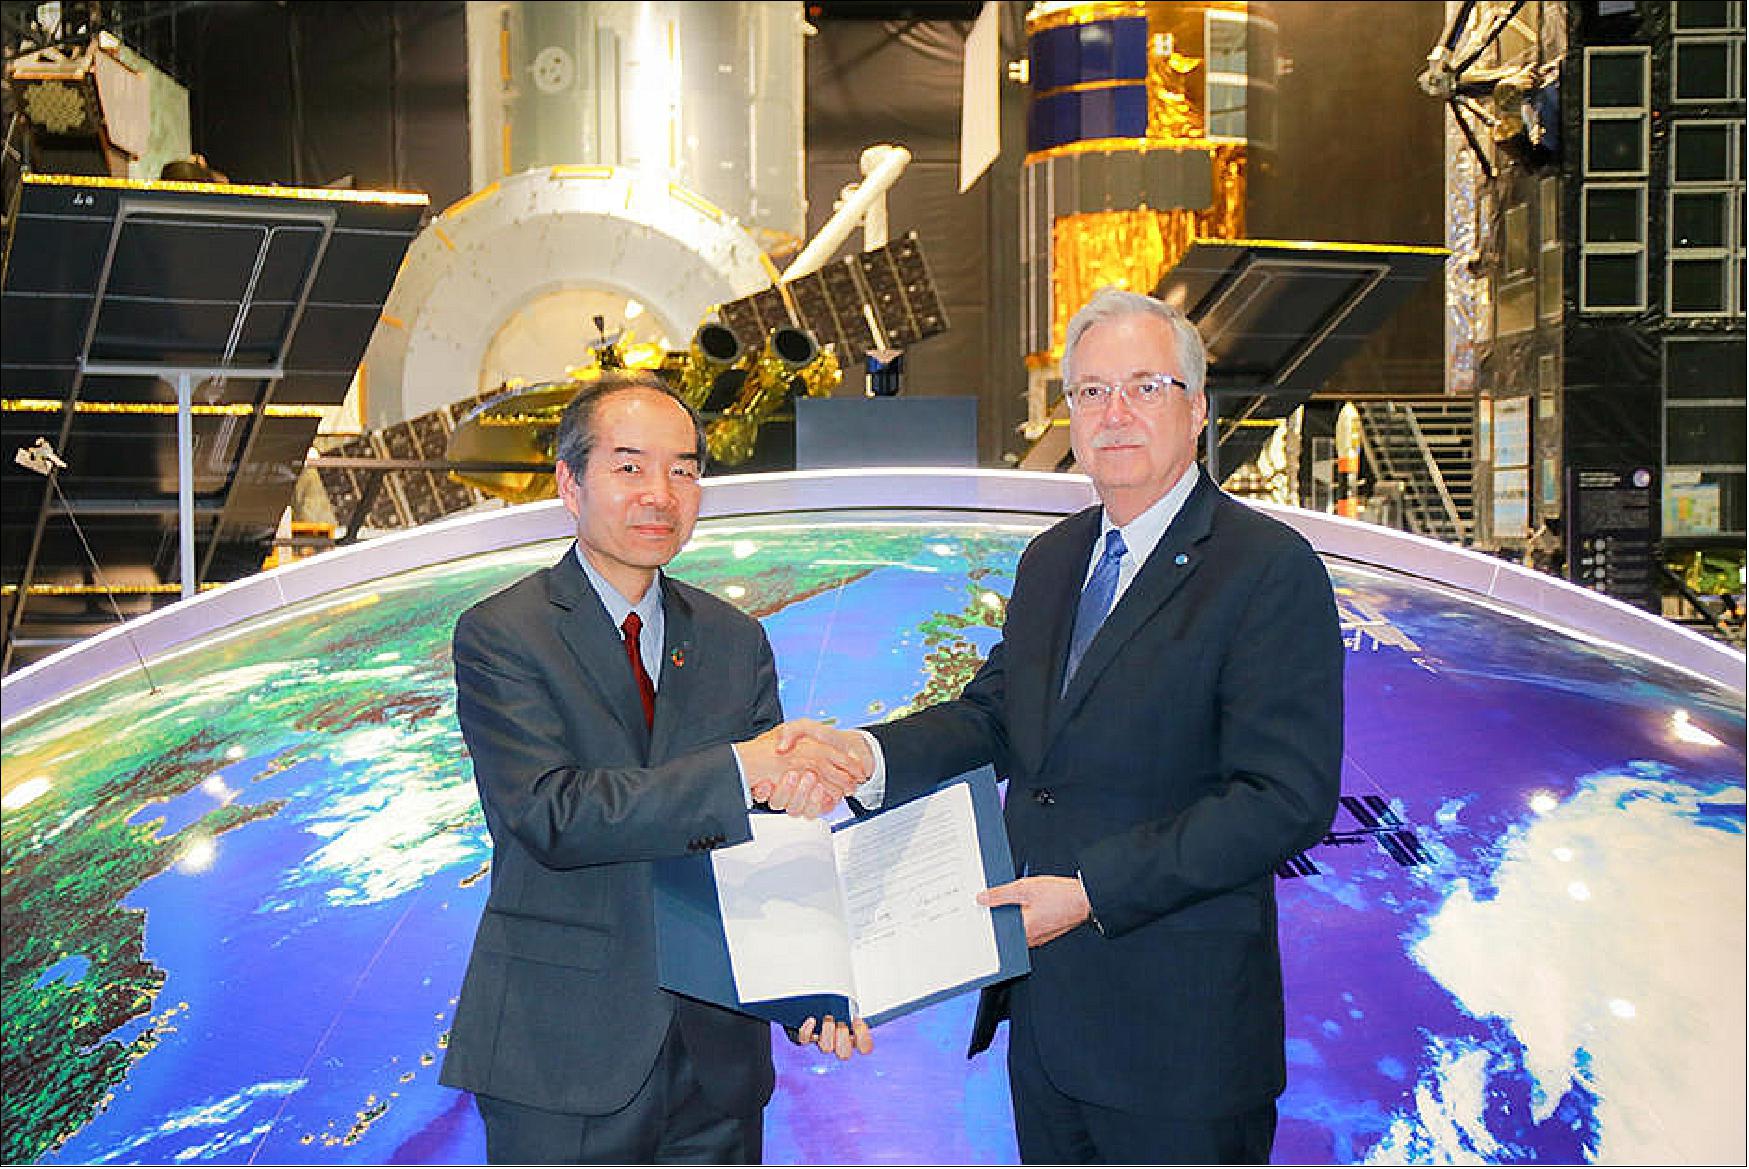 Figure 16: Imai Ryoichi, JAXA Vice President (left) and Daniel Gustafson, FAO’s Deputy Director-General (right) have signed the Memorandum of Understanding on January 23, 2020. The partnership adds powerful L-band radar data to FAO’s geospatial toolkit to monitor forests around the world (image credit: JAXA)